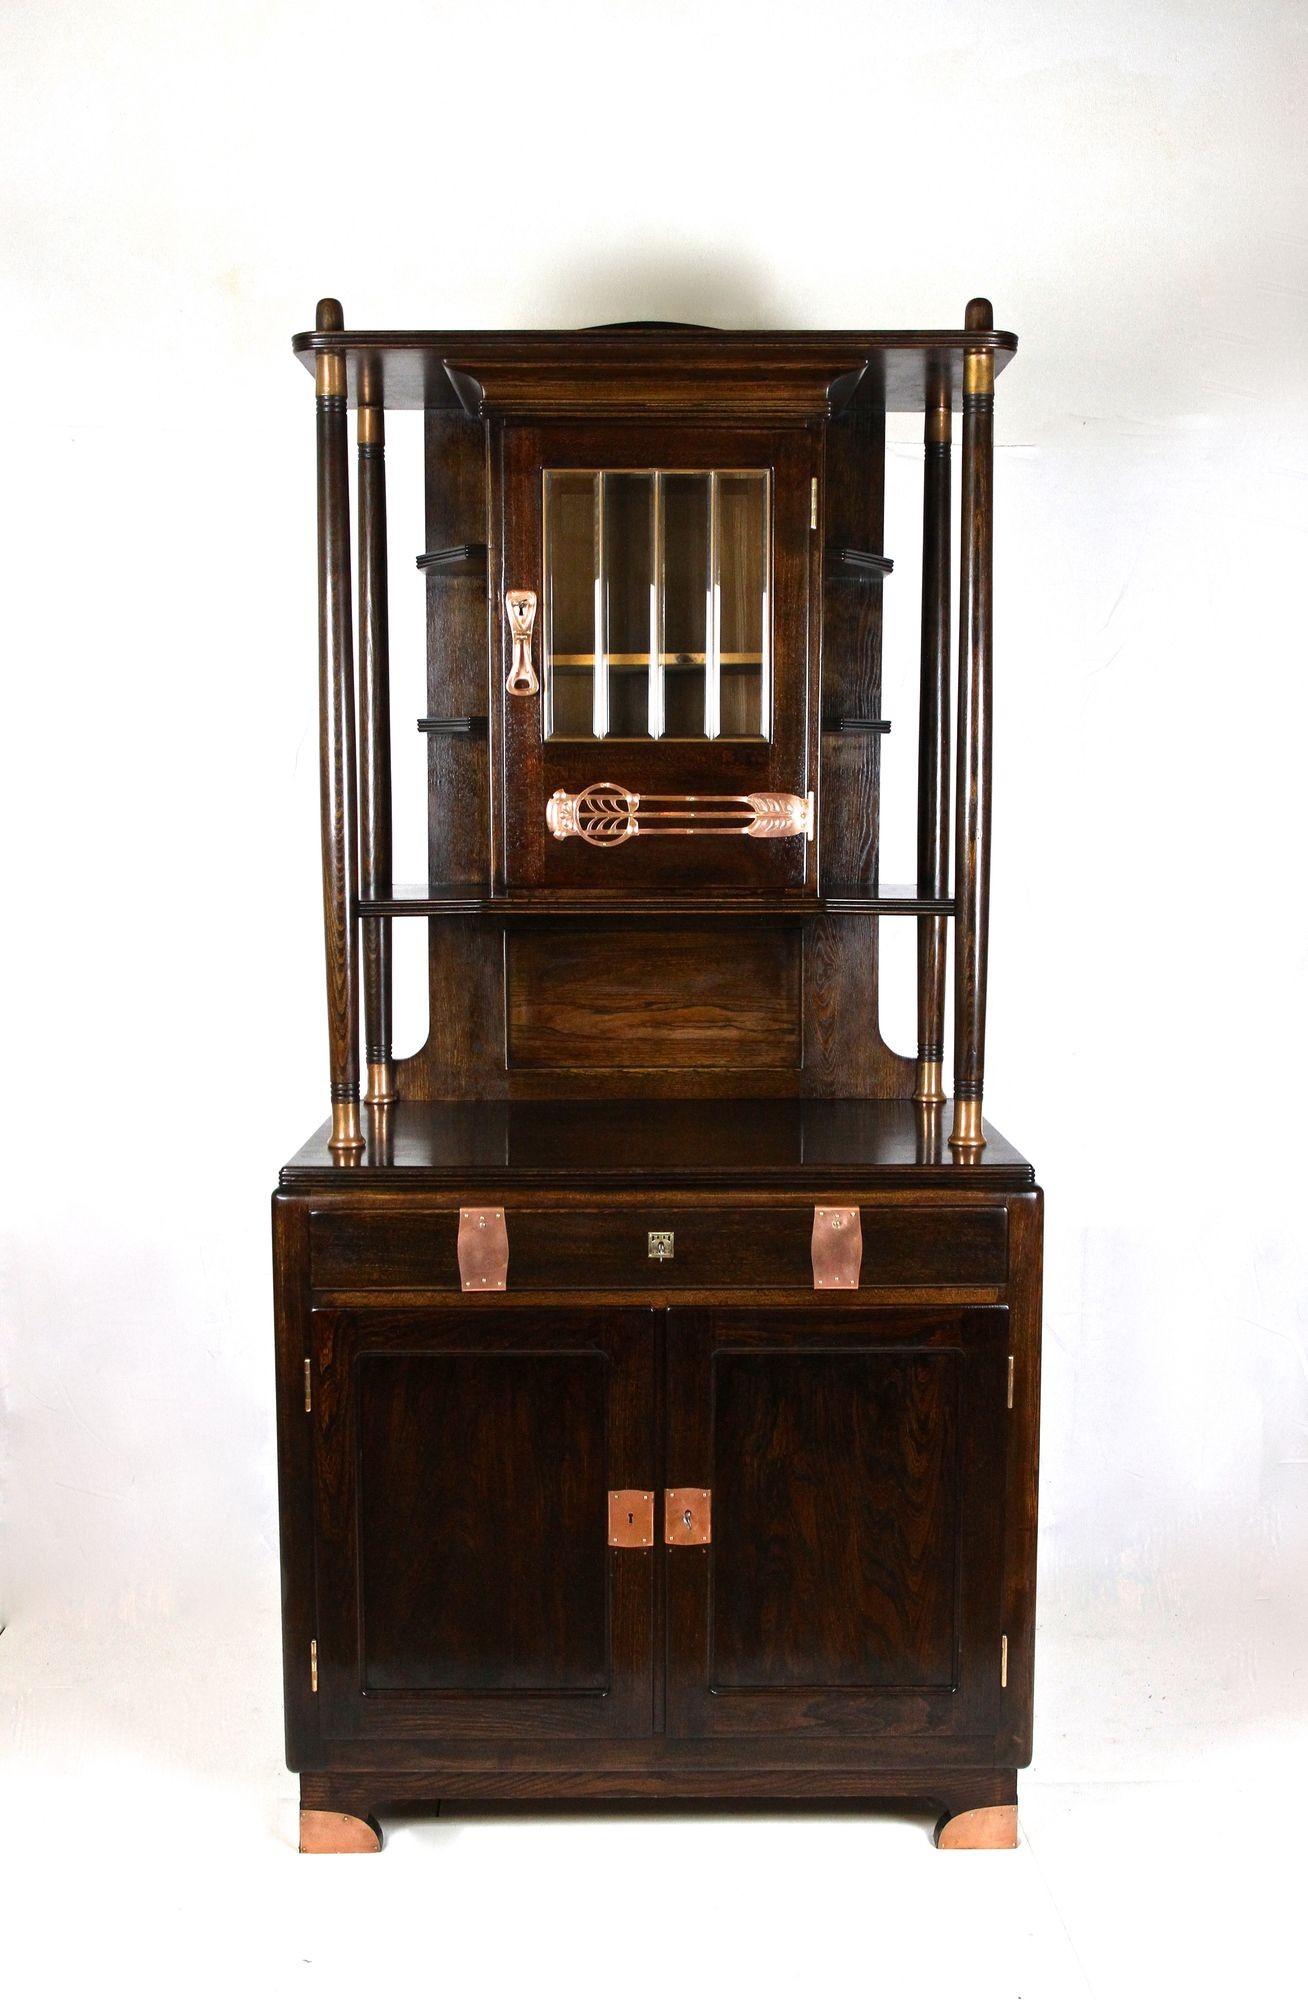 Outstanding Art Nouveau oakwood buffet or cabinet out of Austria from the period around 1910. The lower part provides two wide opening doors with a large storage compartment divided by a shelf and also one lockable drawer. The fantastic designed